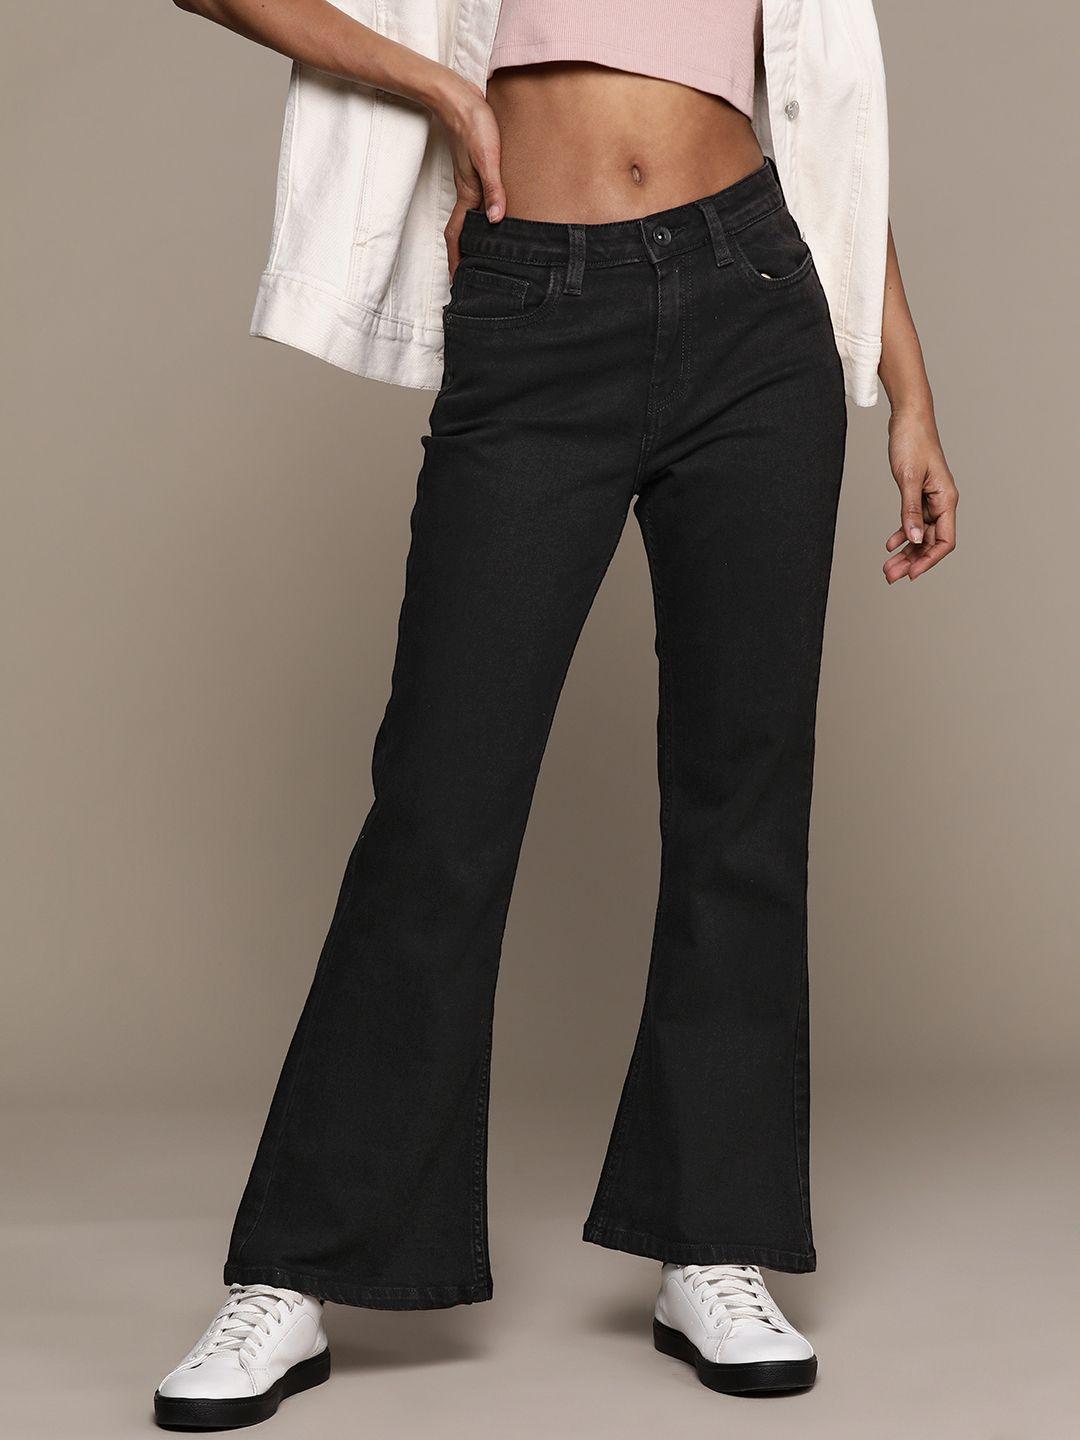 the roadster lifestyle co. women wide leg high-rise stretchable jeans